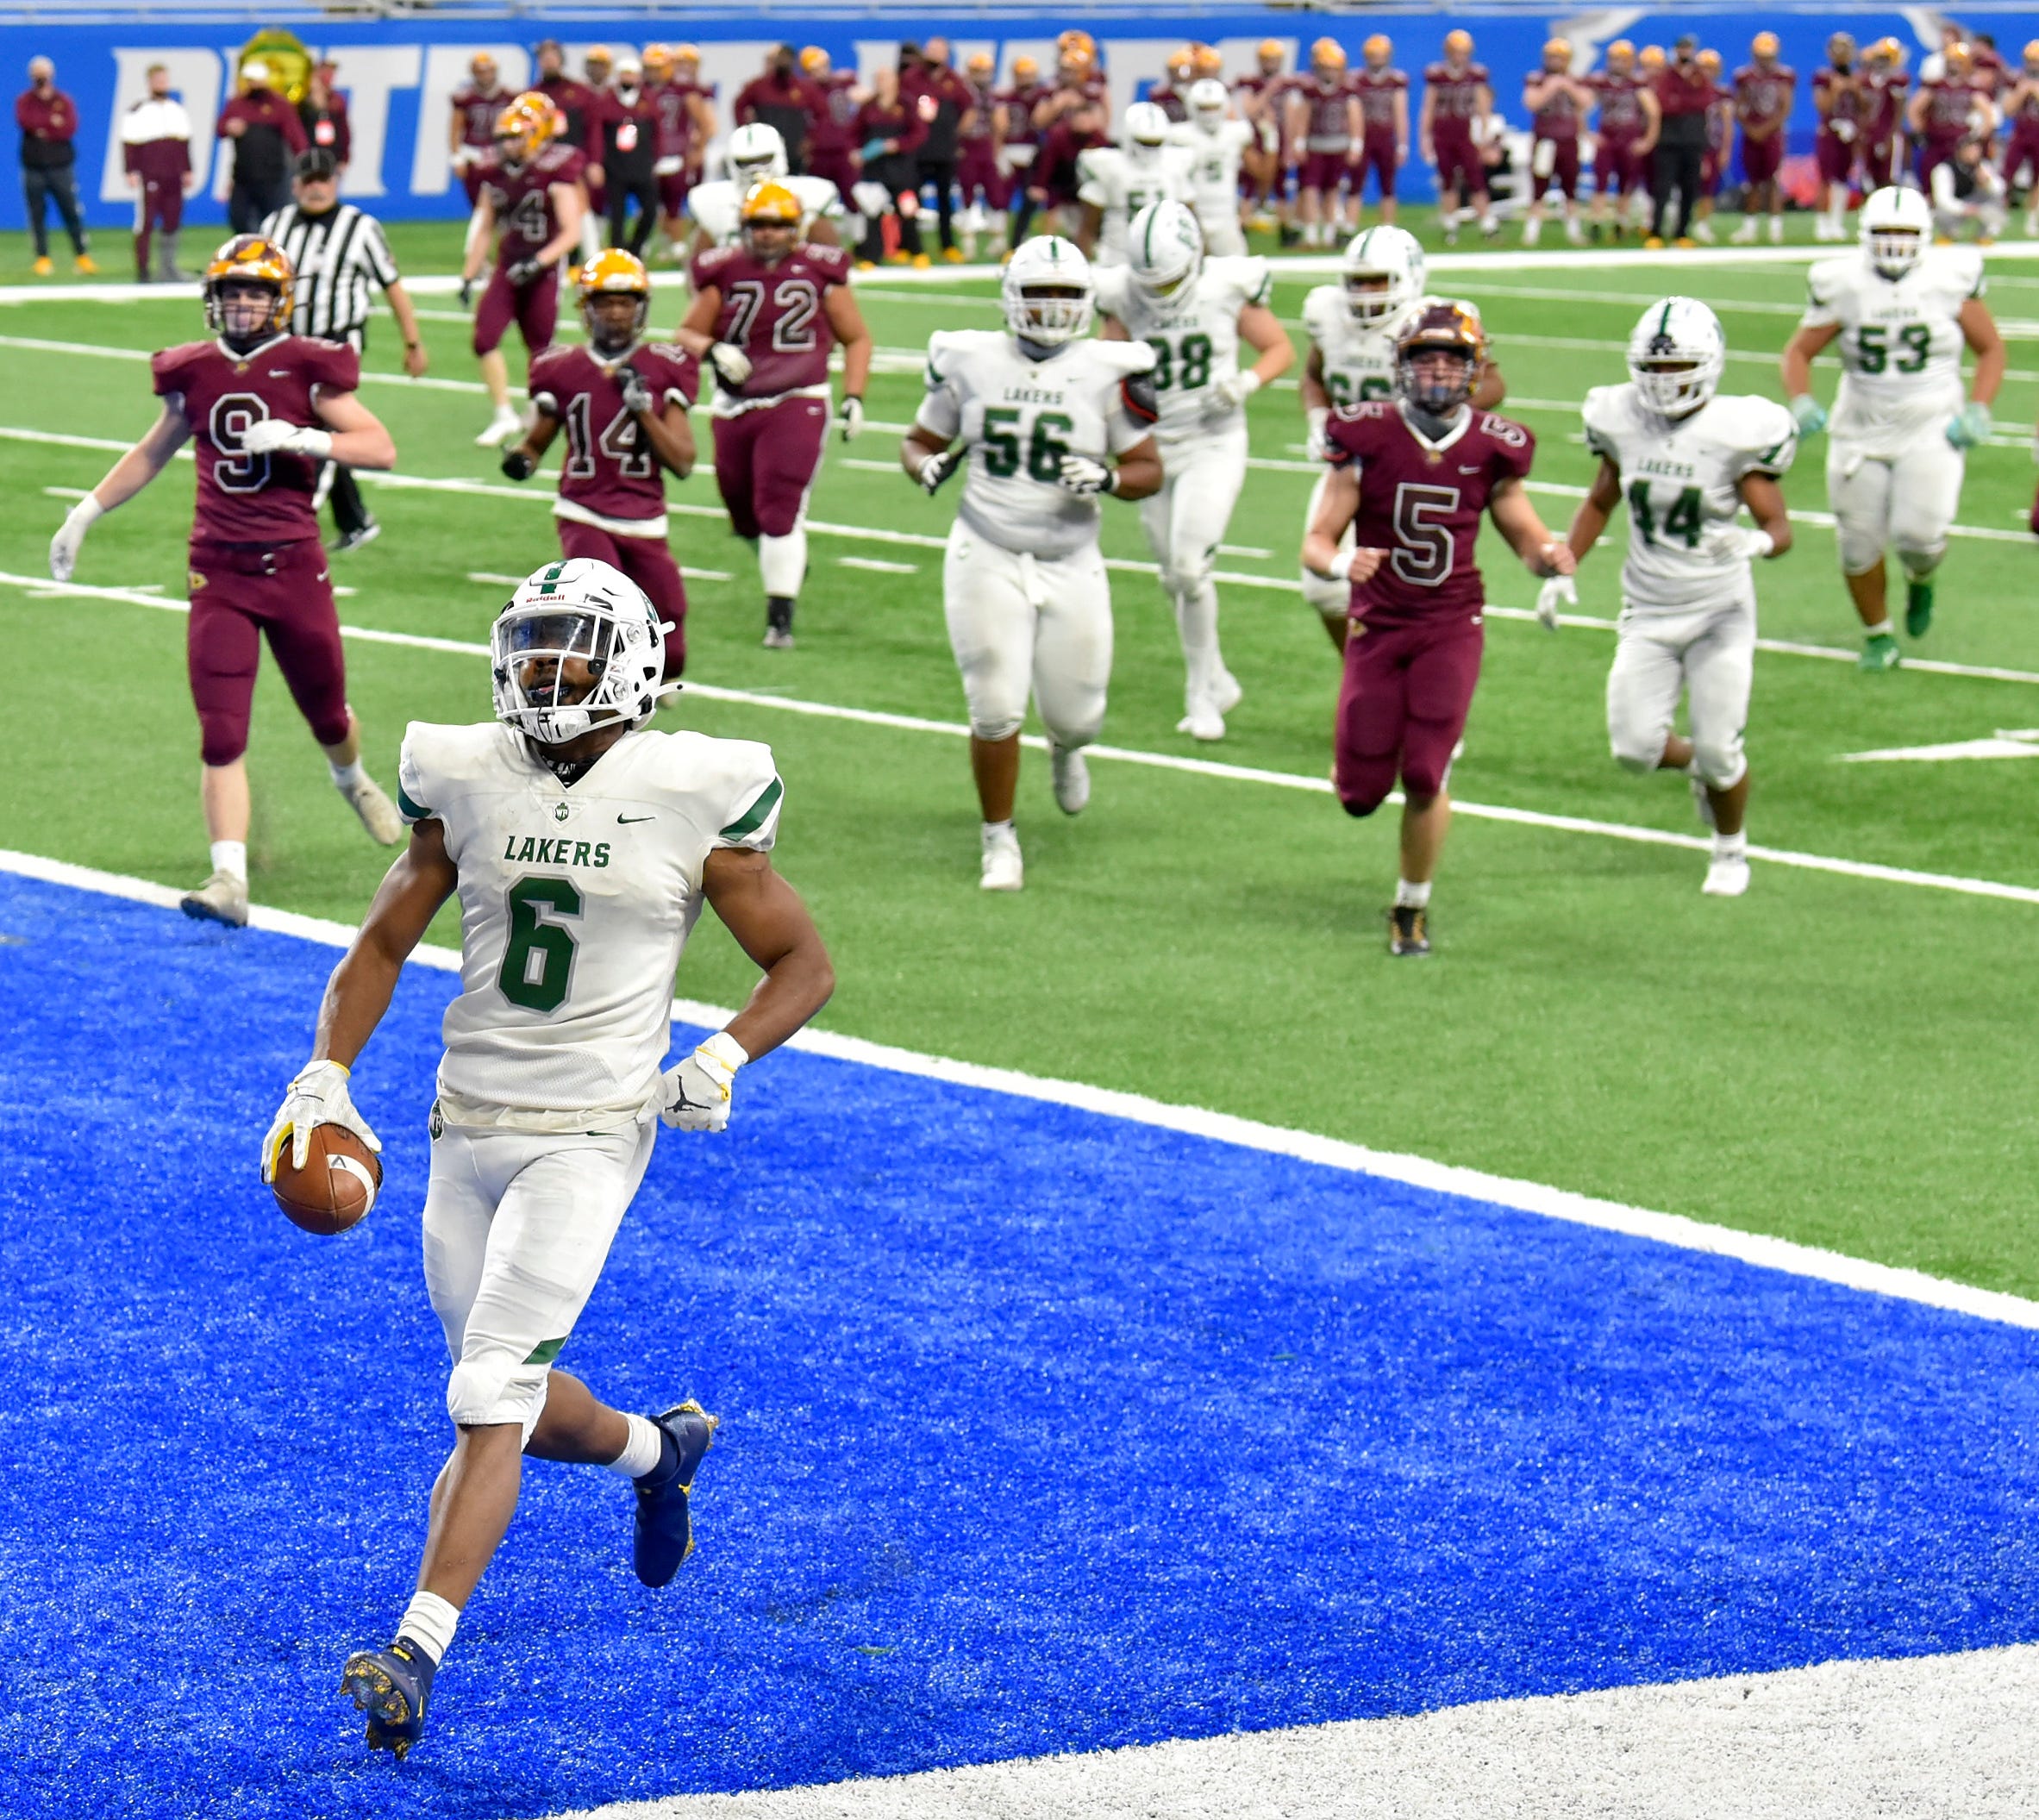 West Bloomfield's Donovan Edwards (6) rushes for a touchdown near the end of the third quarter against Davison High School.